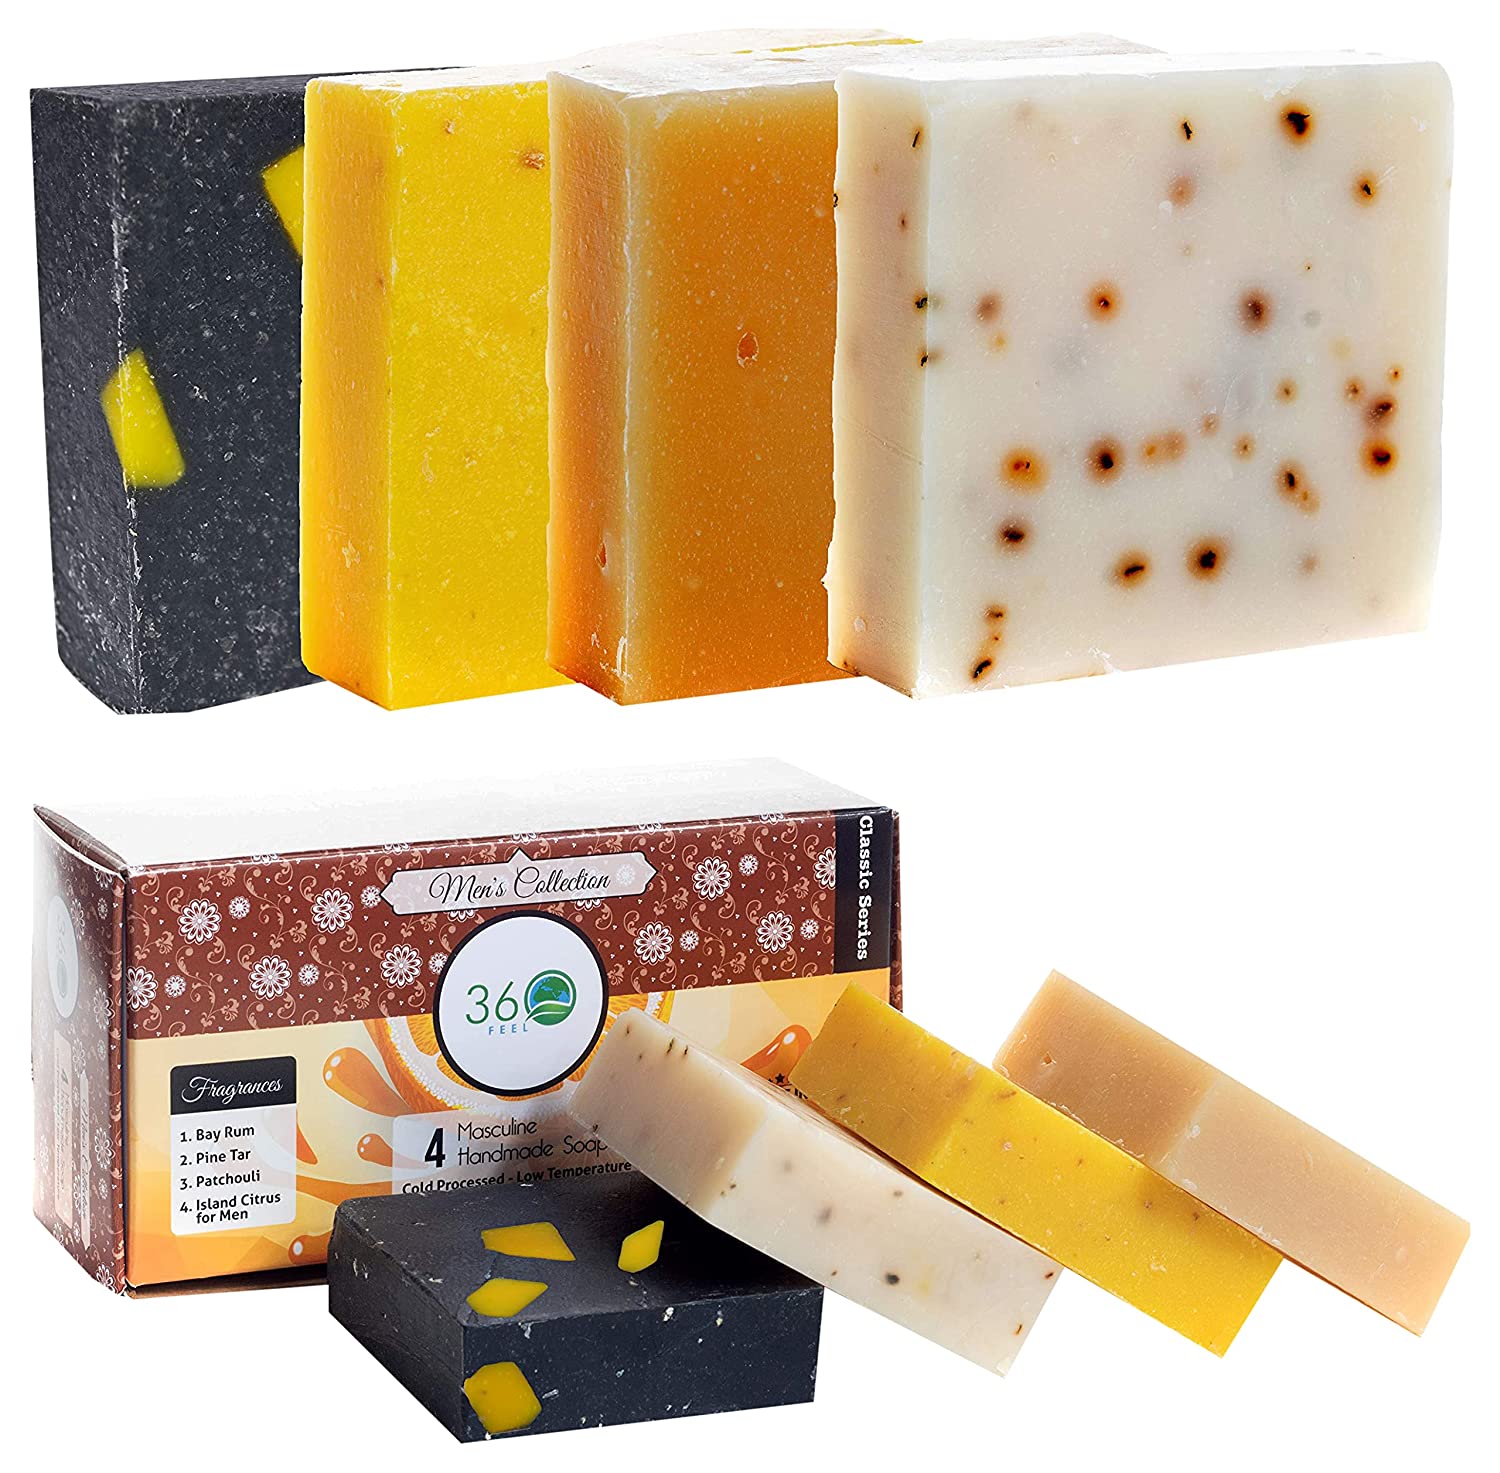 A 4-Count Pack of 360Feel Men’s Soap Bars that consist of Pine Tar, Citrus, Charcoal Beeswax, and Patchouli fragrances in blue, yellow, orange, and white colors